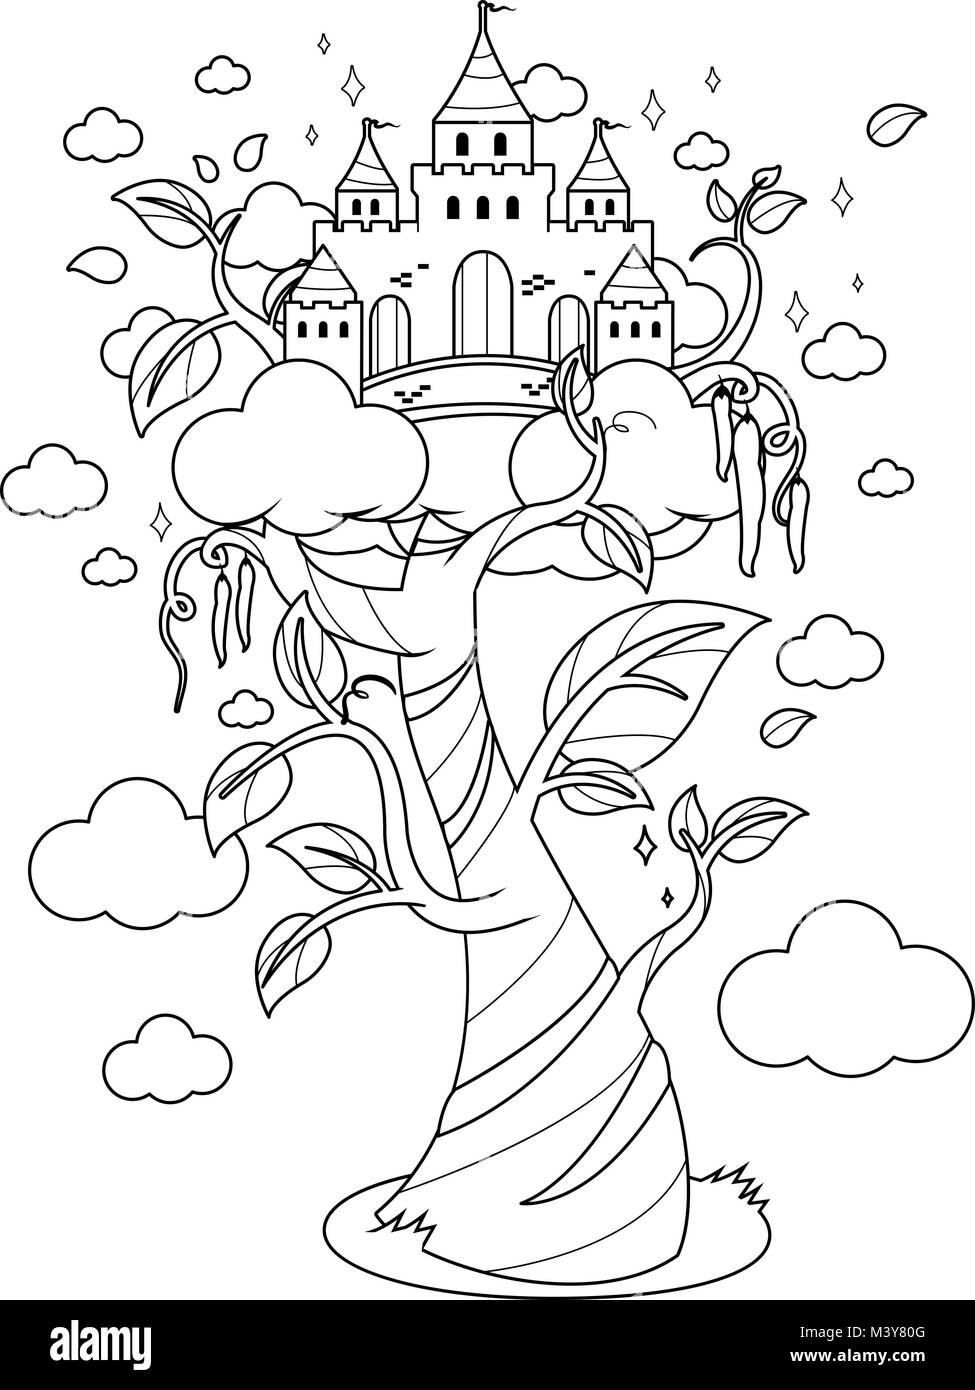 Magic beanstalk and castle. Black and white coloring book page Stock Vector